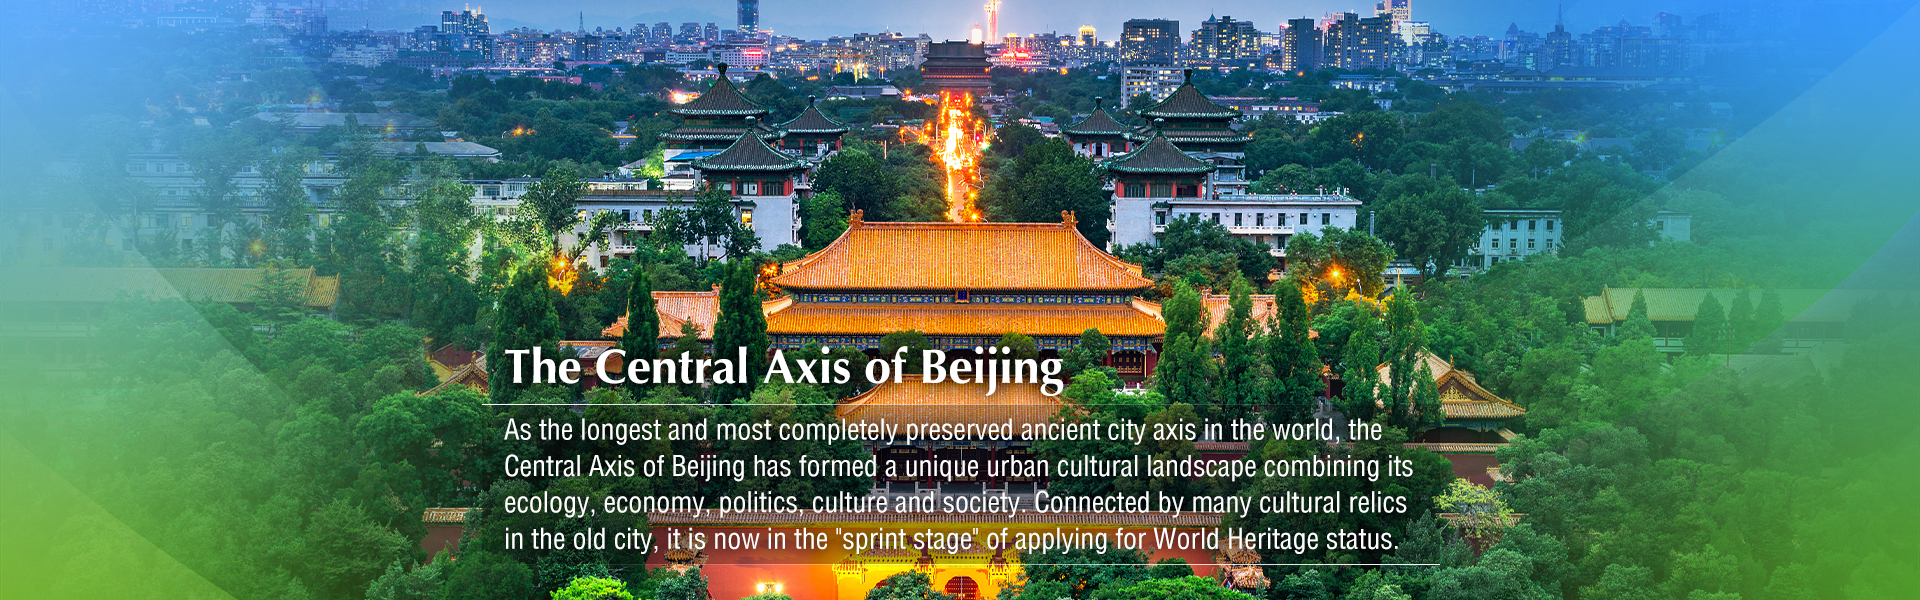 The Central Axis of Beijing